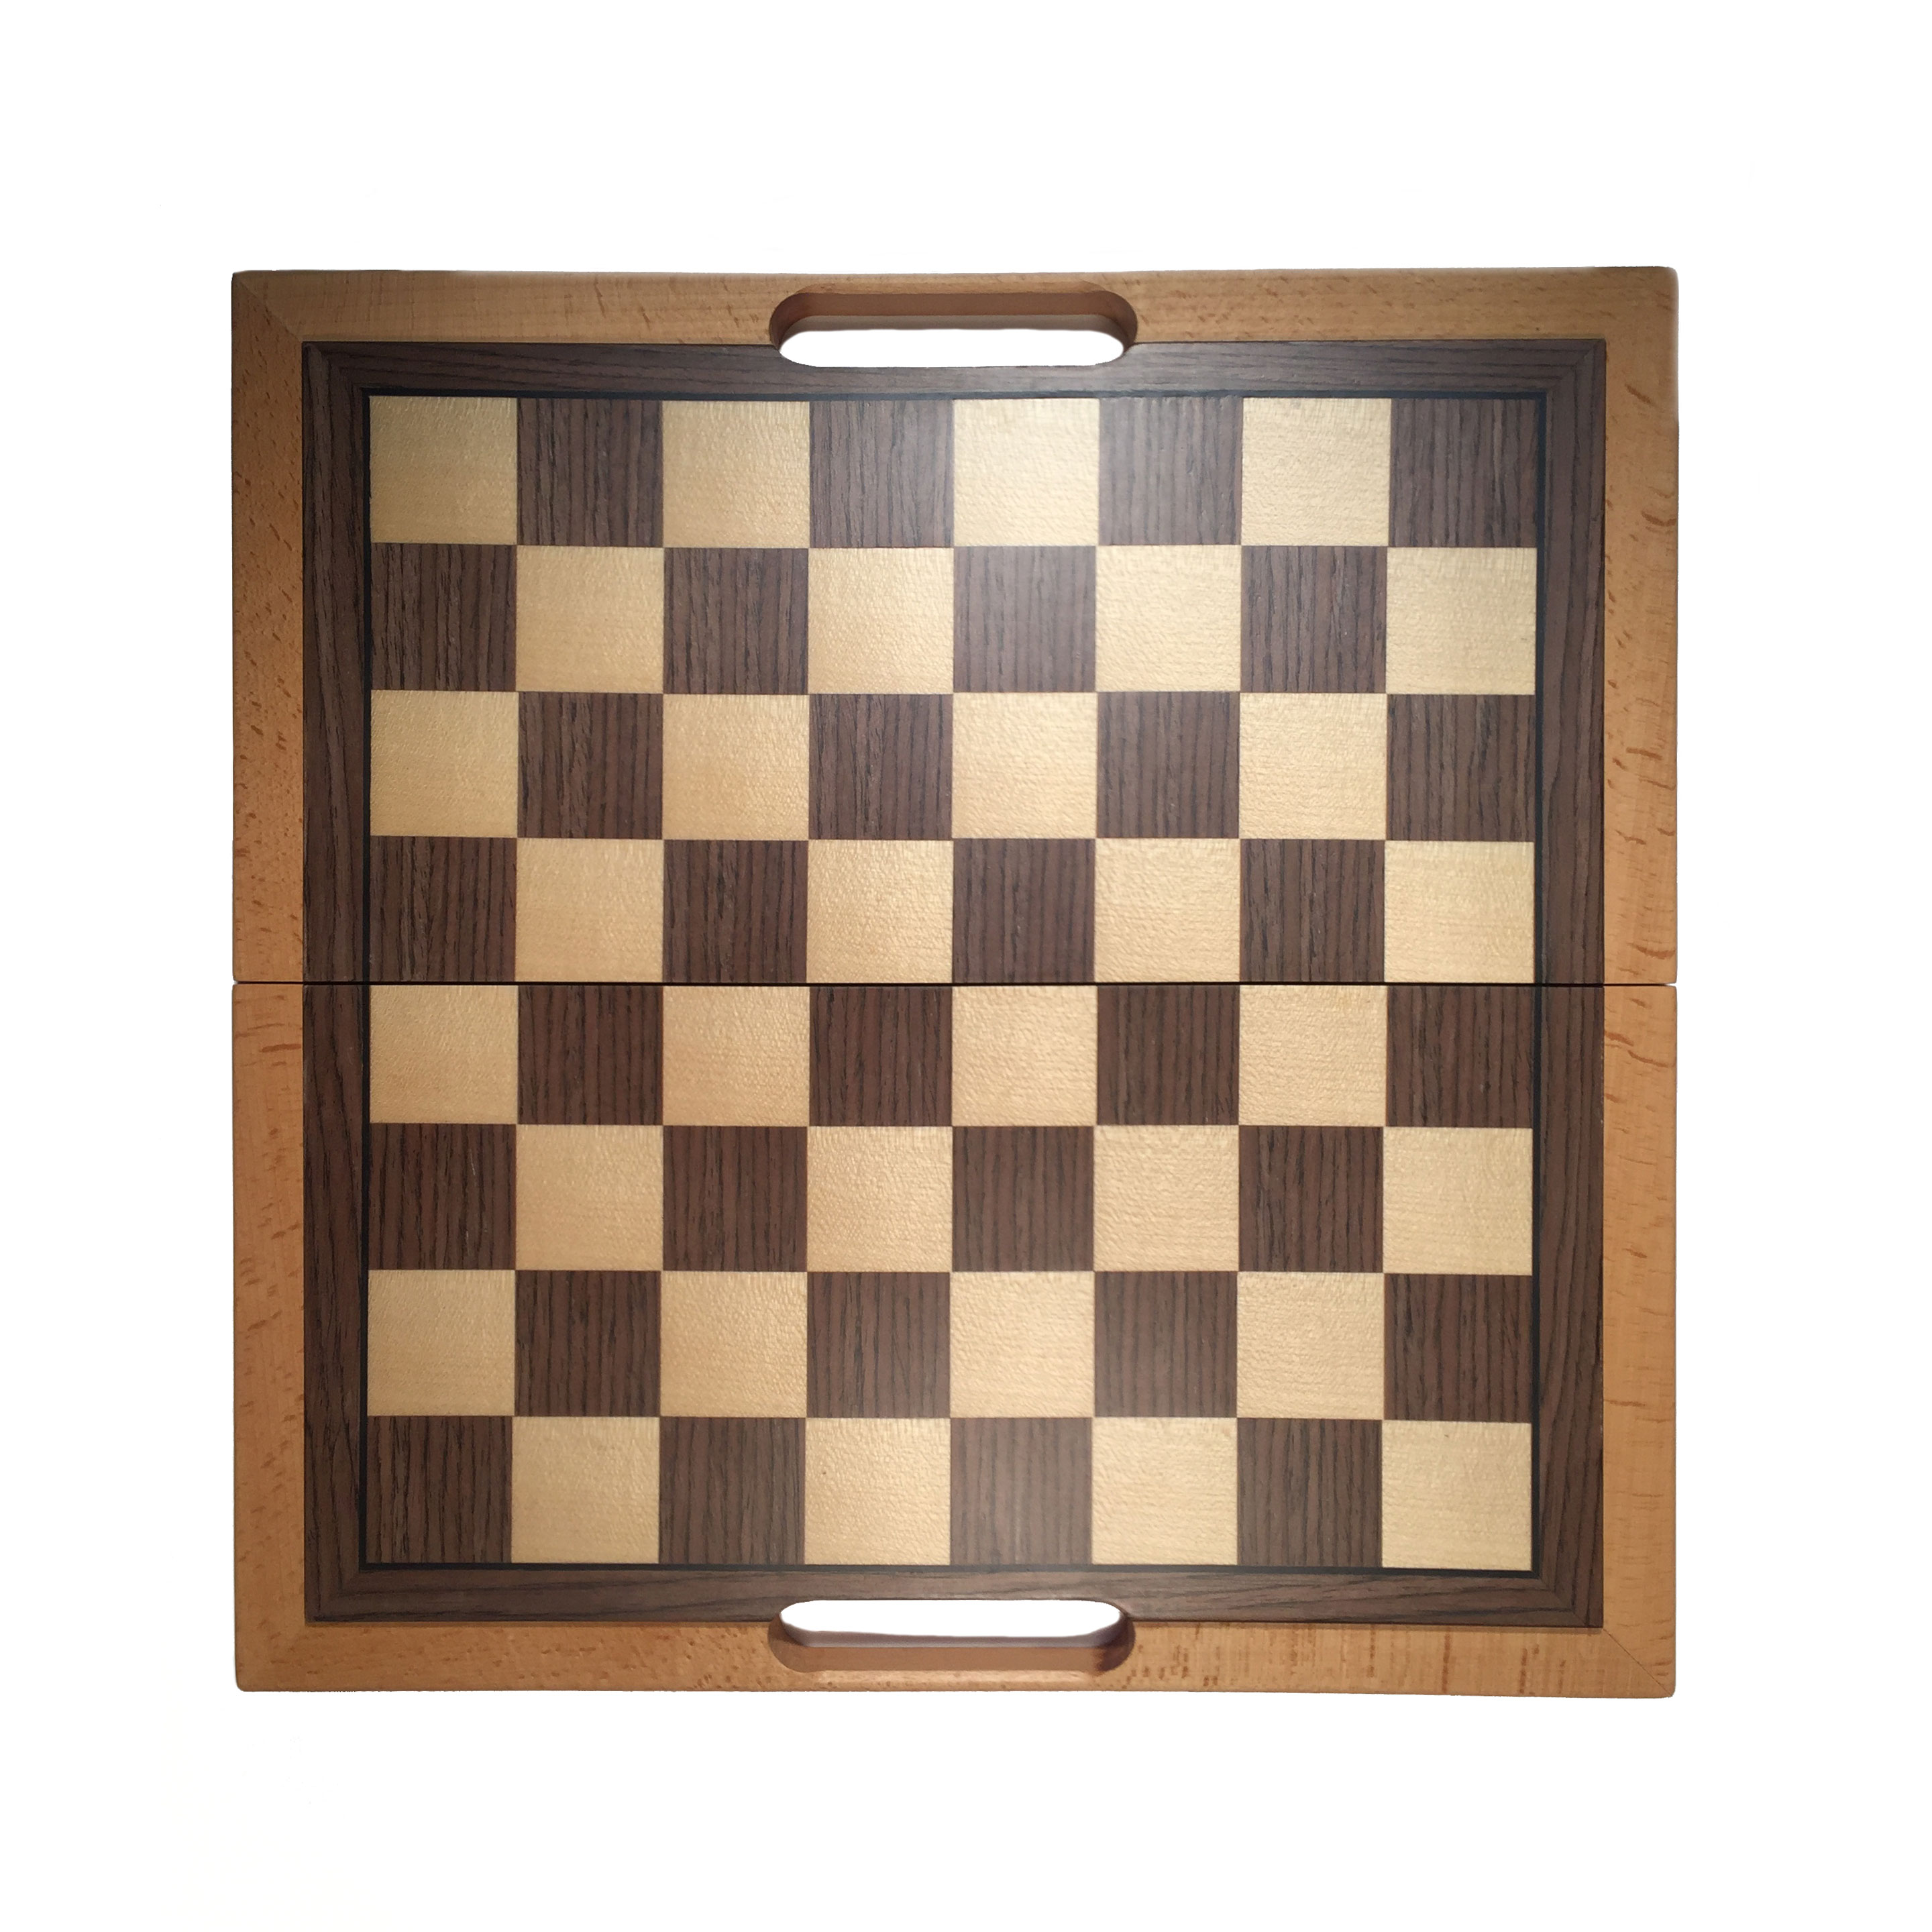 Puzzle game Chess Wooden Set Folding Chessboard Backgammon Draughts Wood Board 